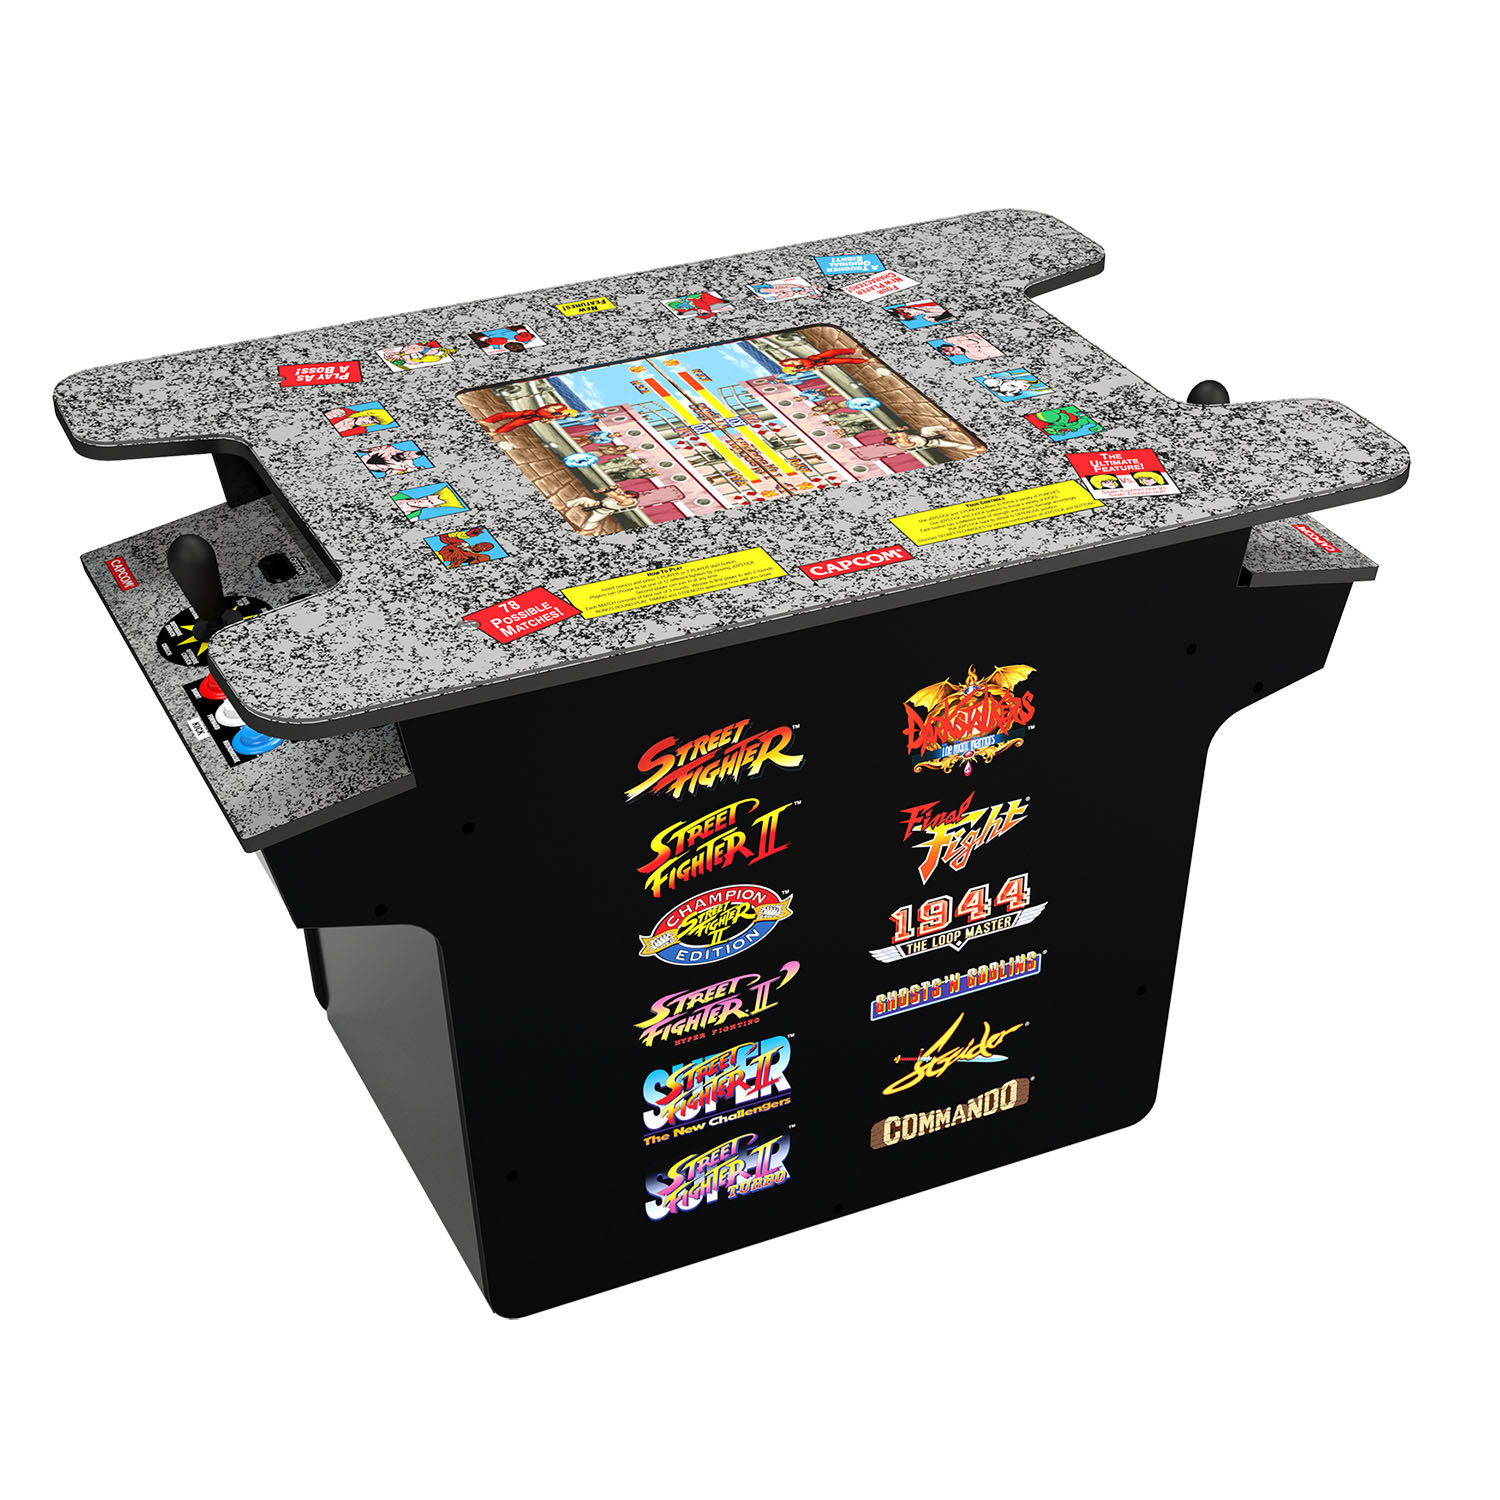 The arcade game table